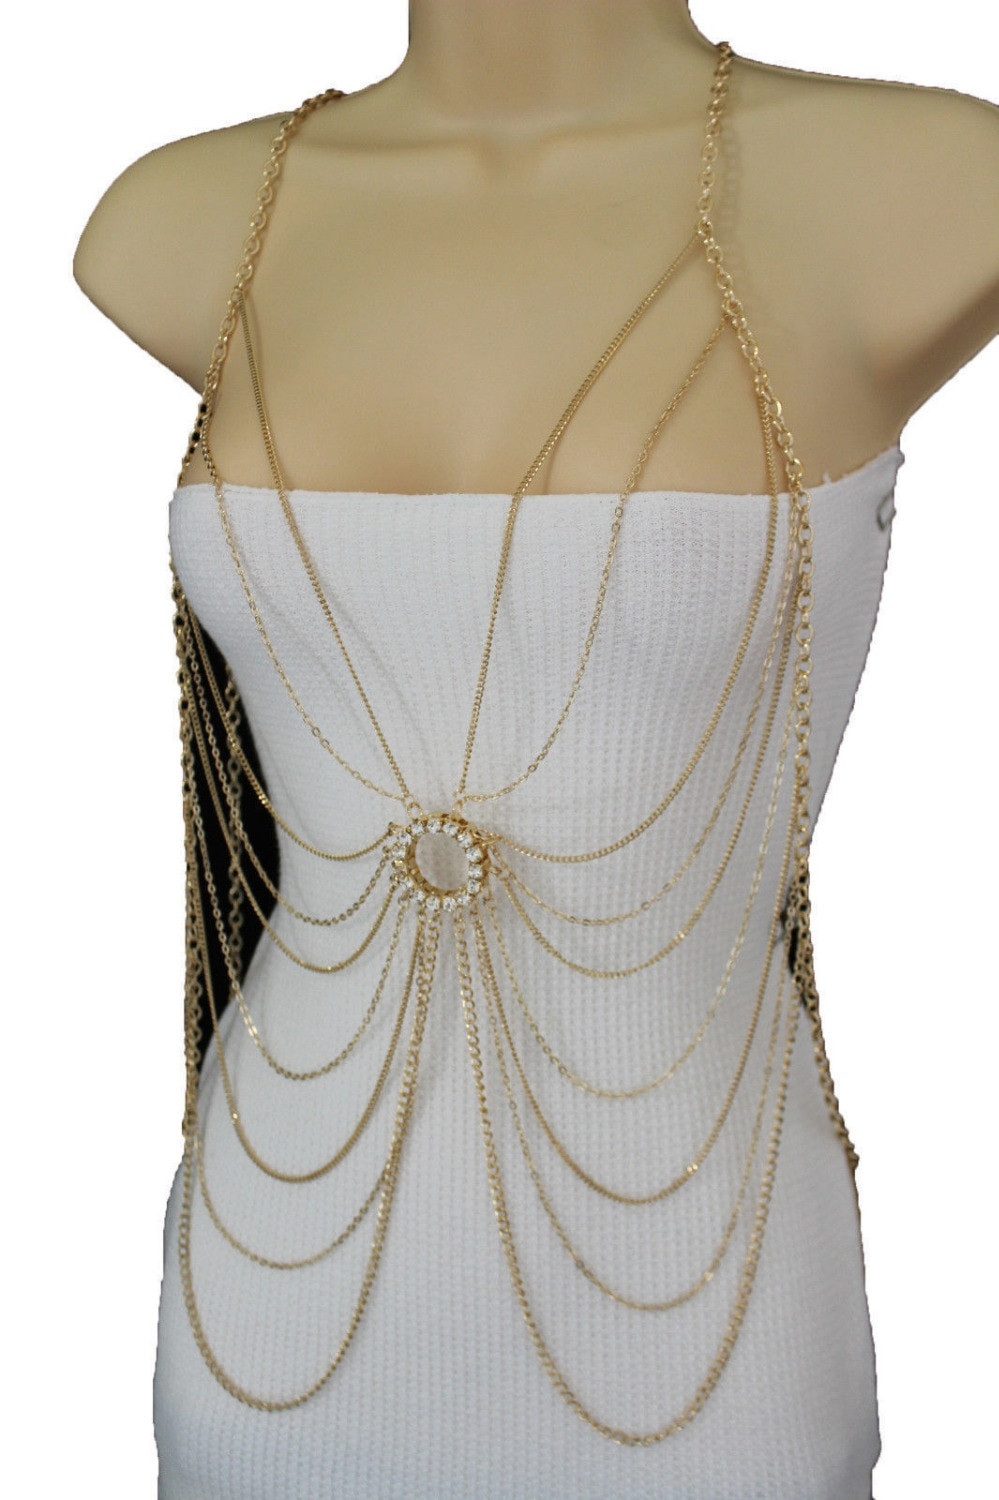 Body Jewelry Outfit
 New Women Gold Metal e Side Long Shoulder Body Chain